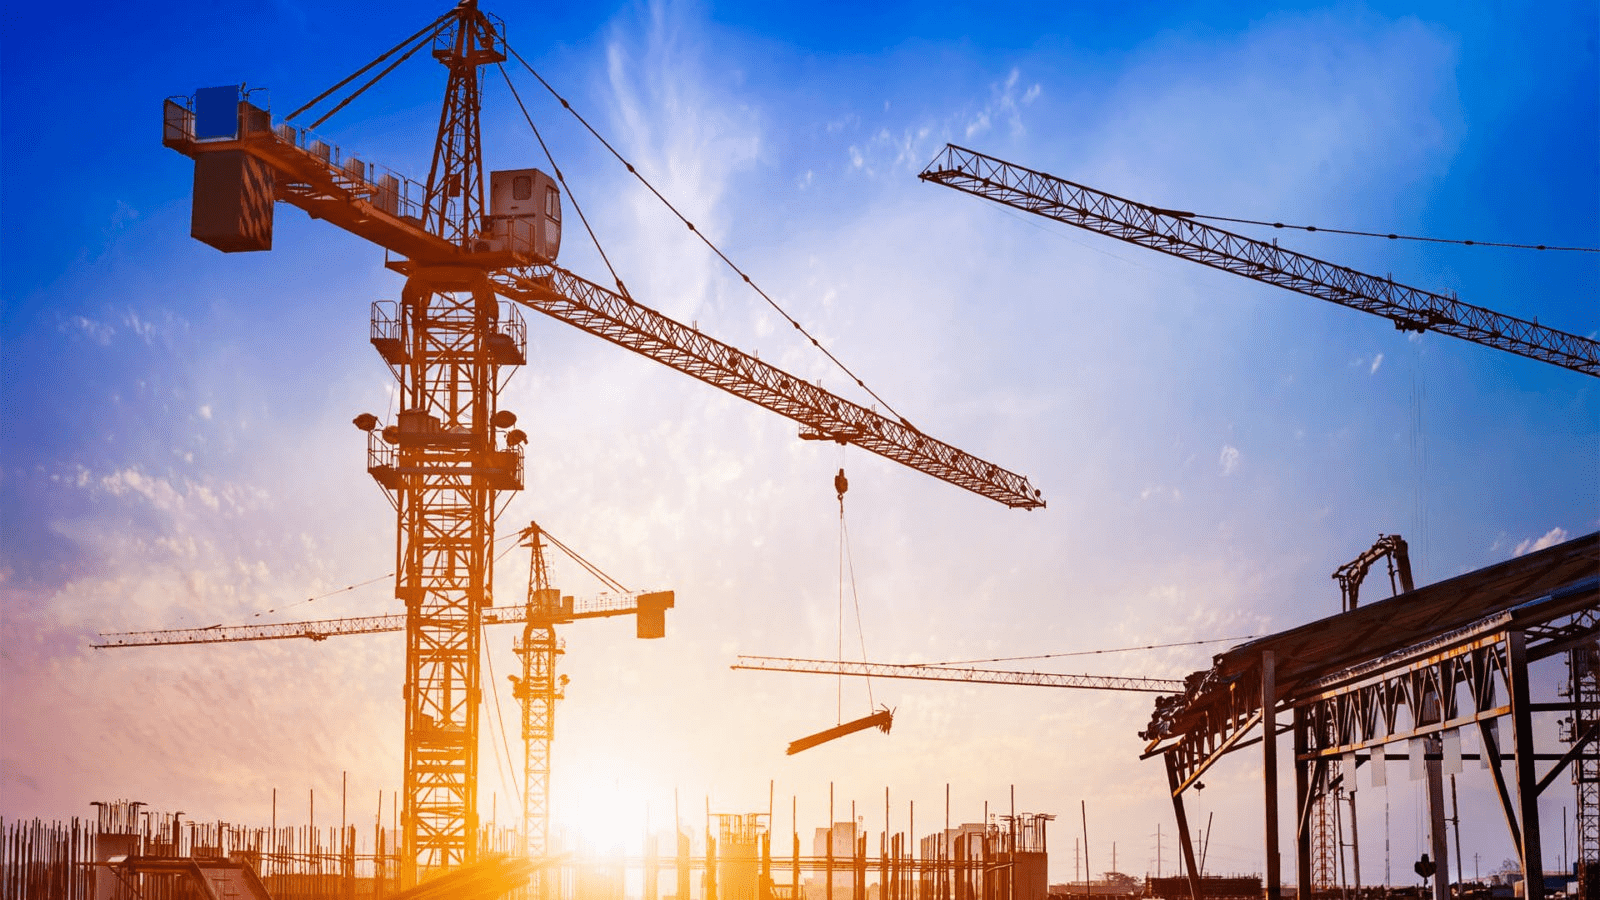 Tower cranes in a construction building at sunrise